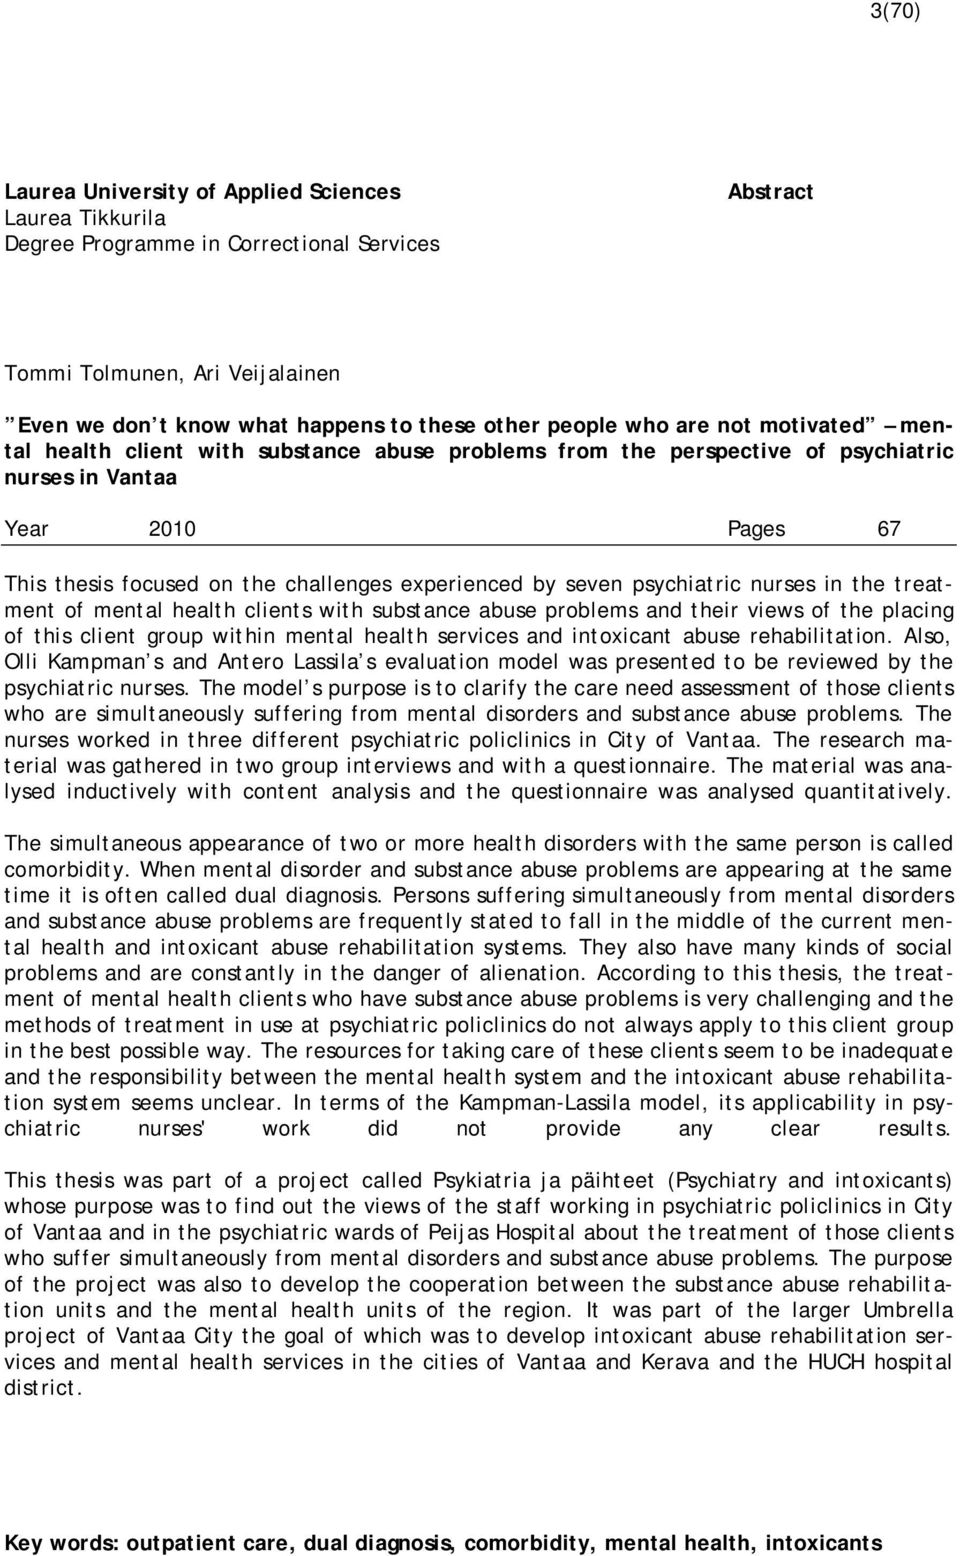 seven psychiatric nurses in the treatment of mental health clients with substance abuse problems and their views of the placing of this client group within mental health services and intoxicant abuse